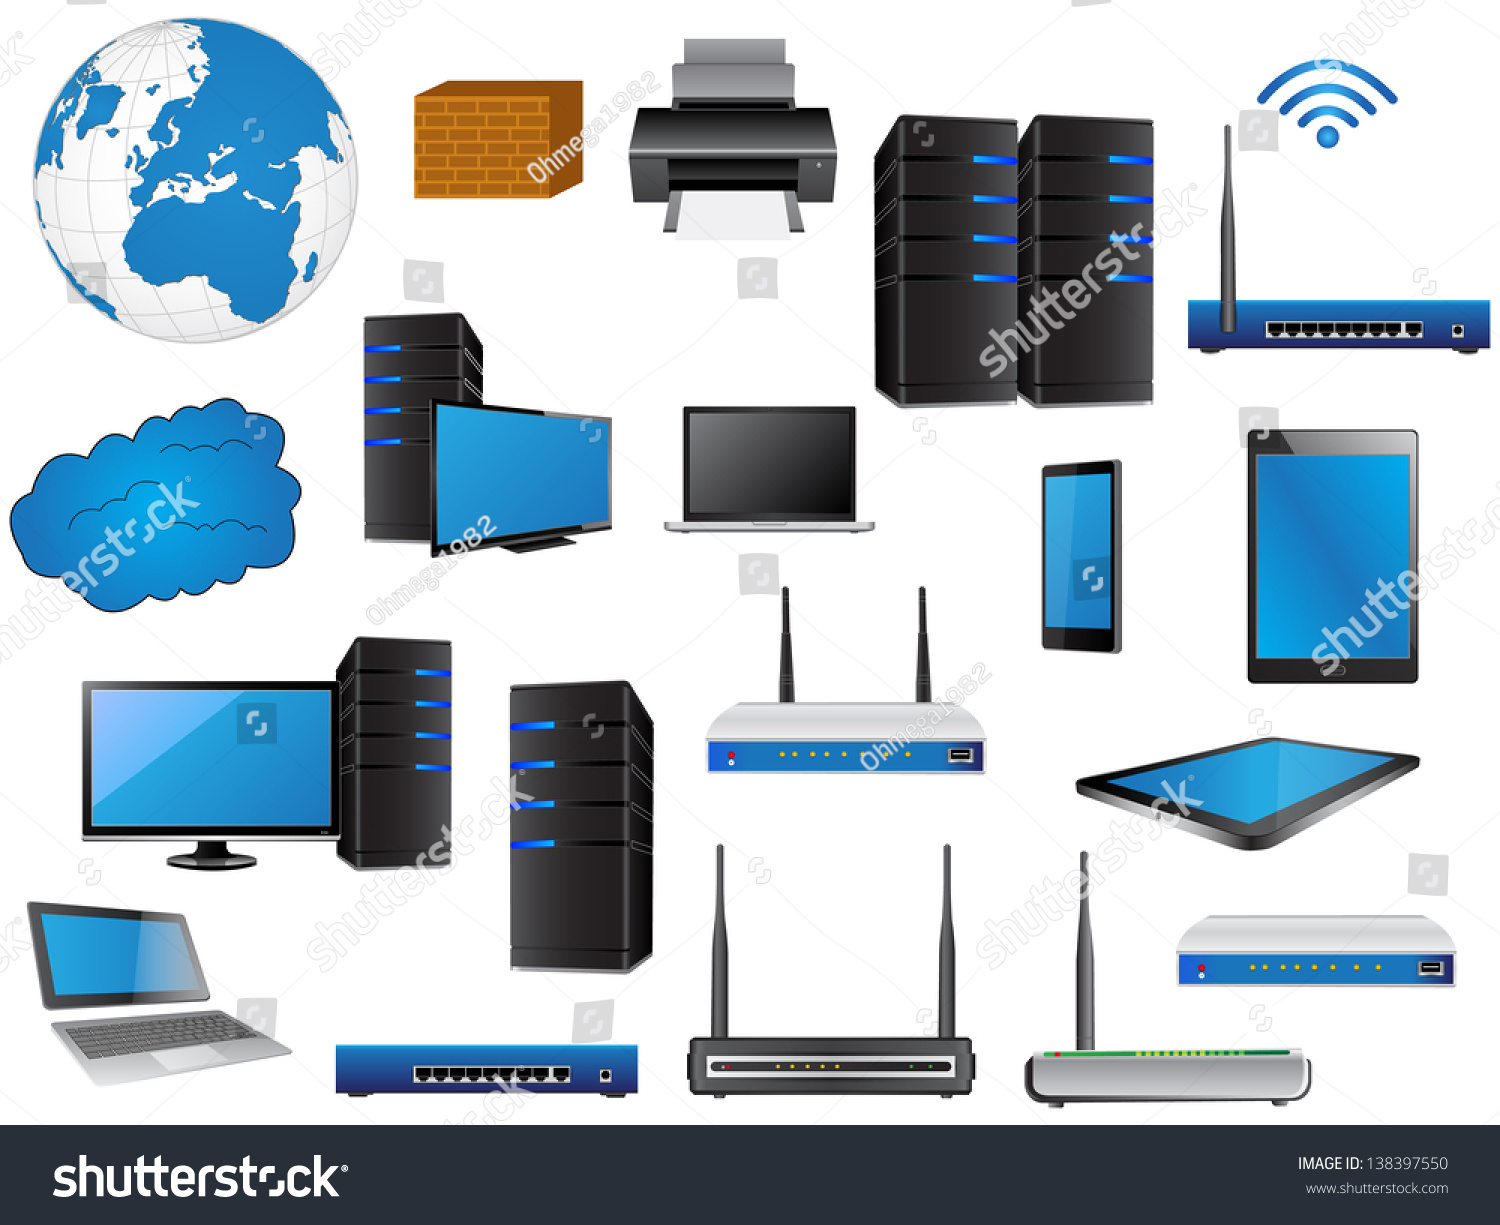 clipart for network diagram - photo #46